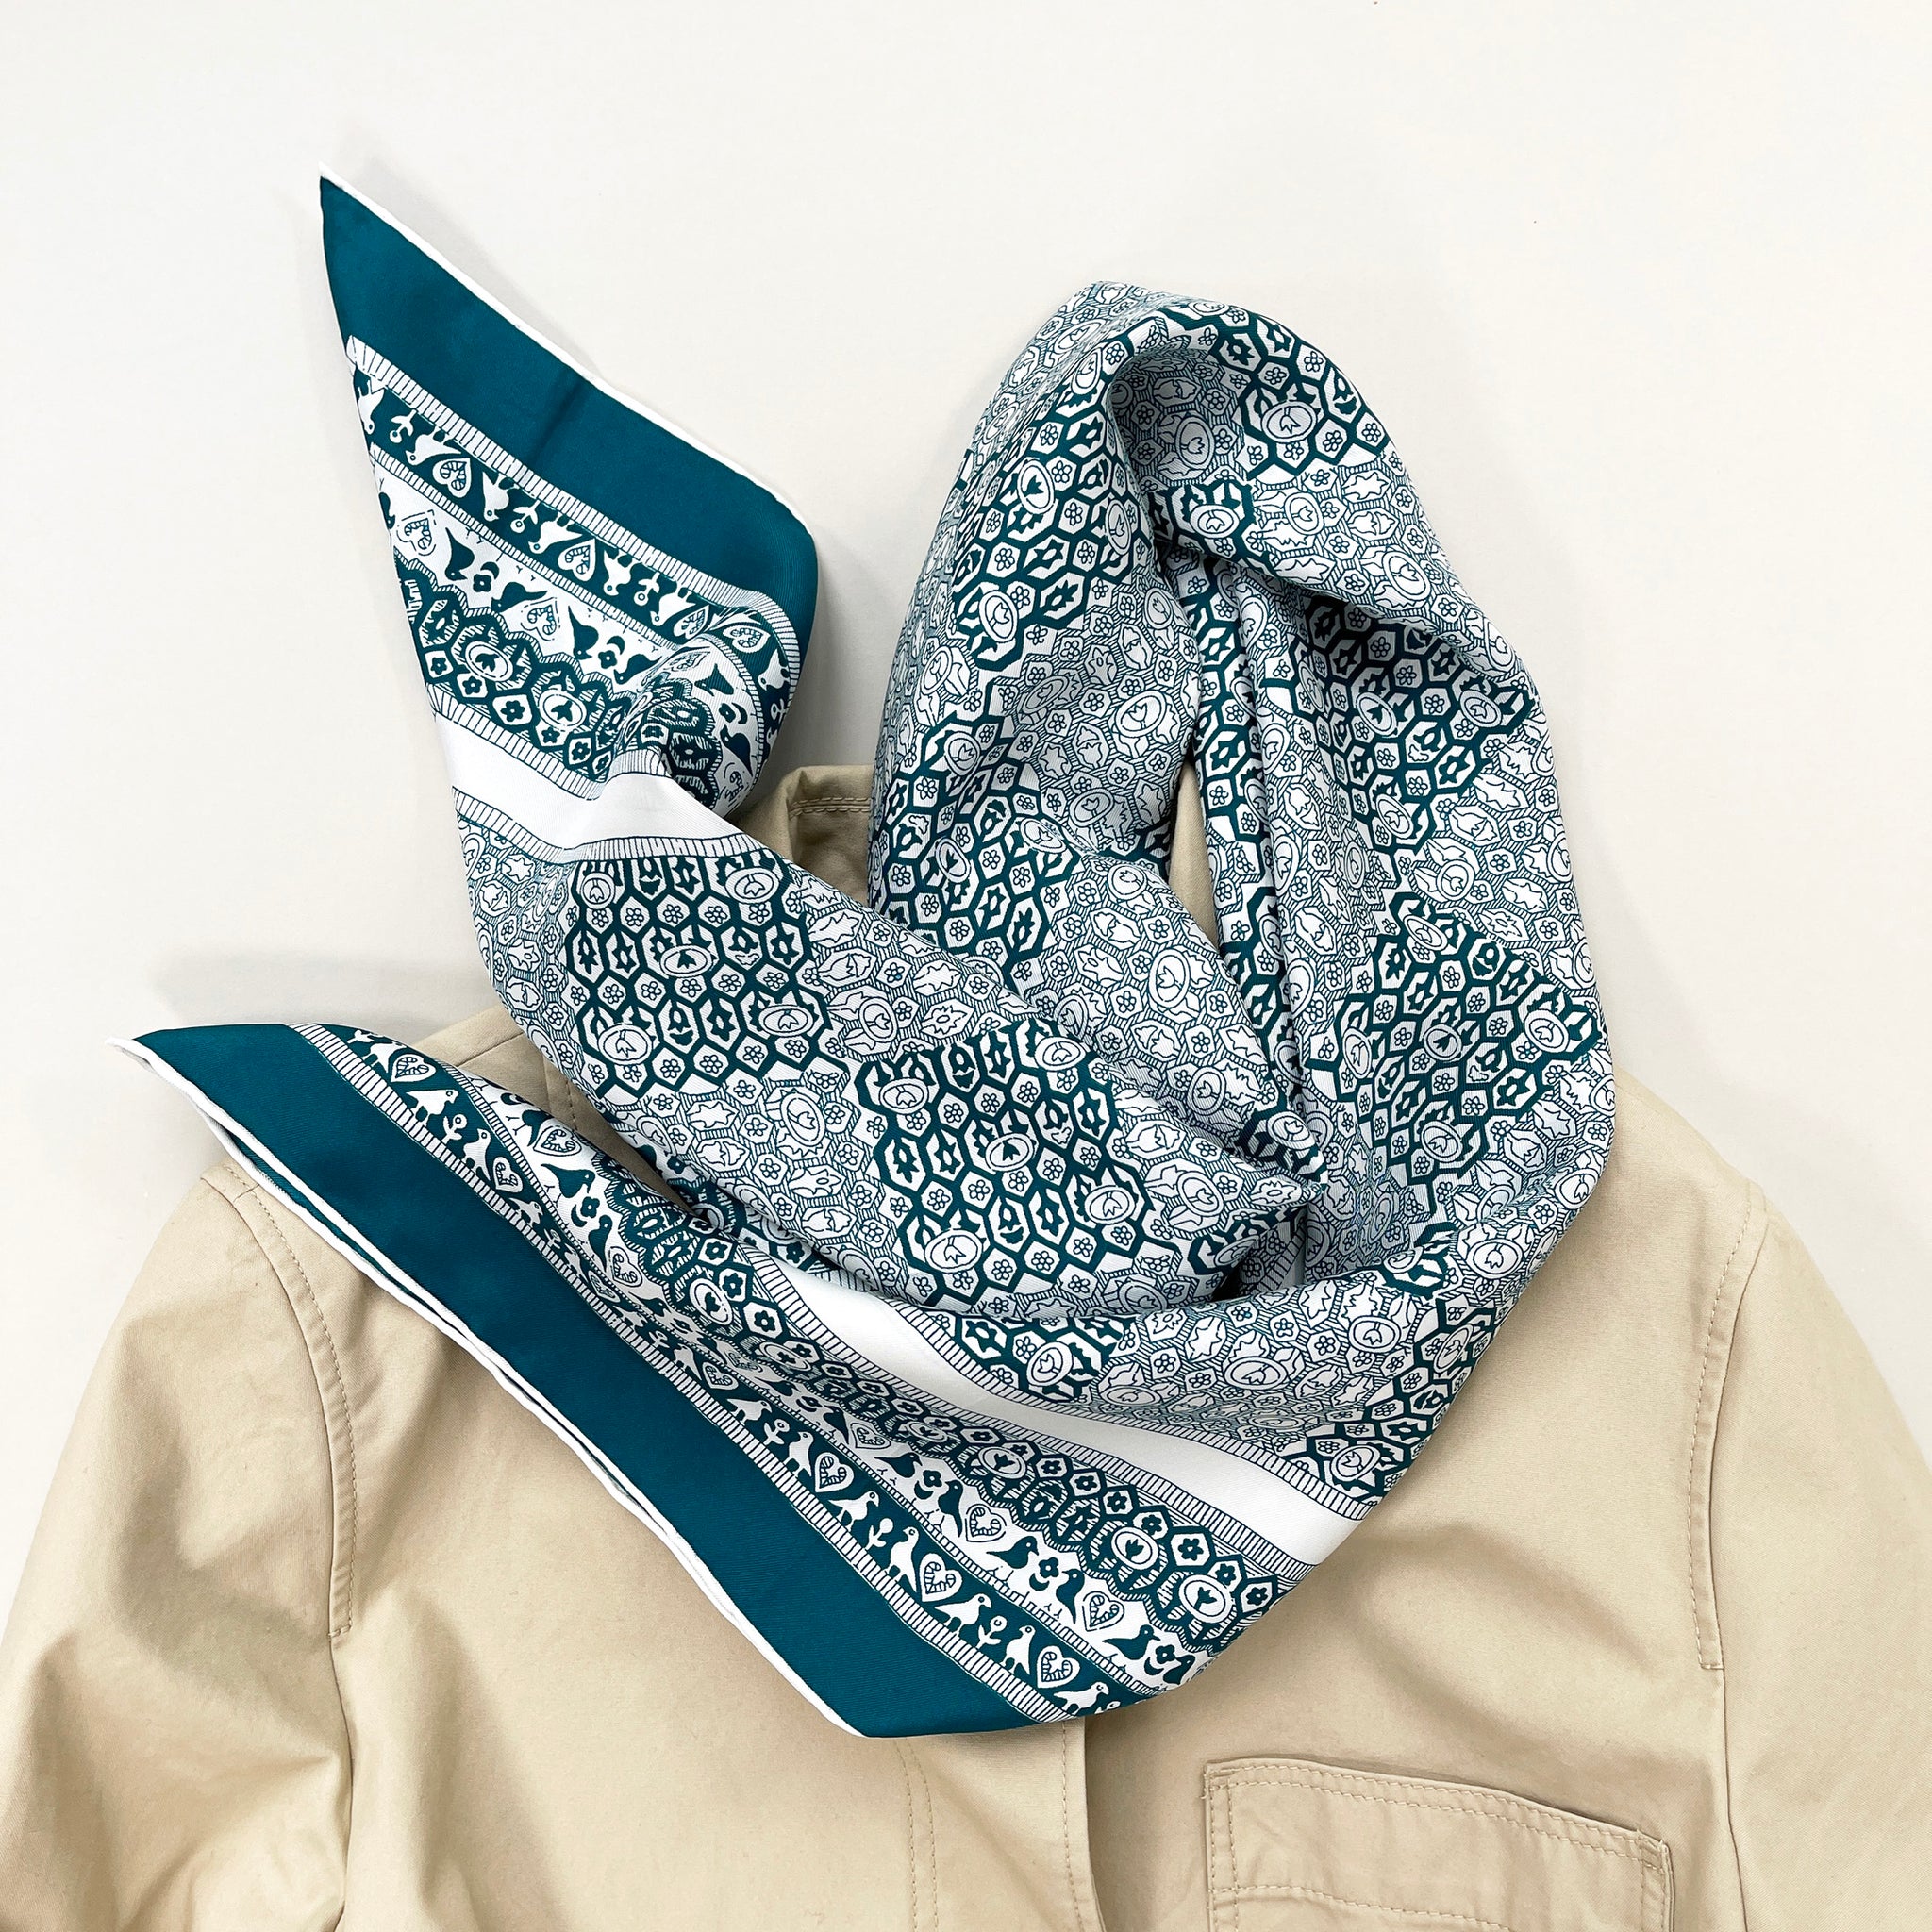 a turquoise blue square silk scarf with birds, flowers and trees prints laying on a beige coat